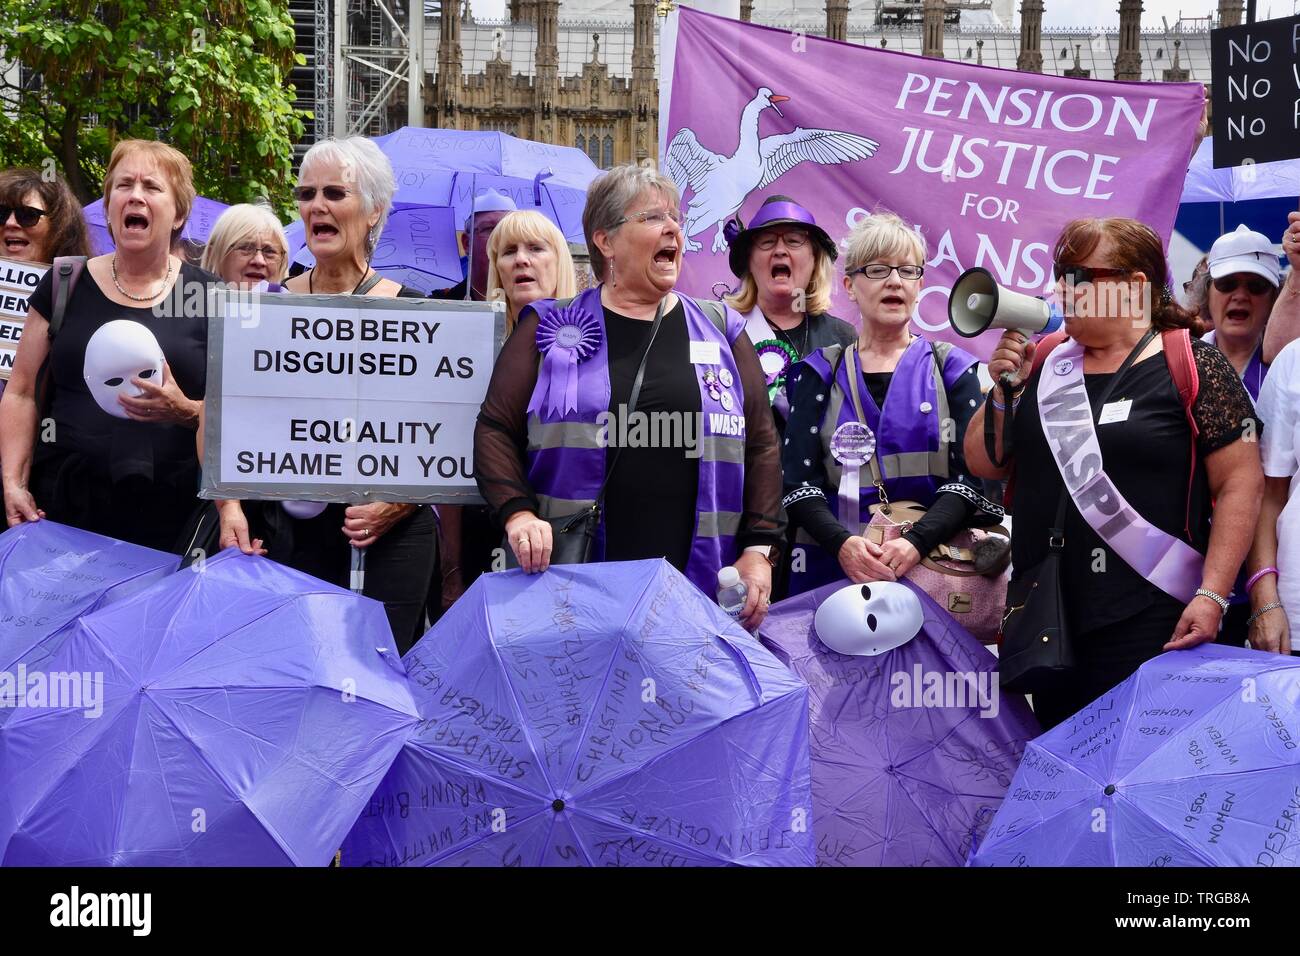 London, UK. 05th June, 2019. WASPI protesters demonstrate against pension inequality. Parliament Square, London. UK Credit: michael melia/Alamy Live News Stock Photo